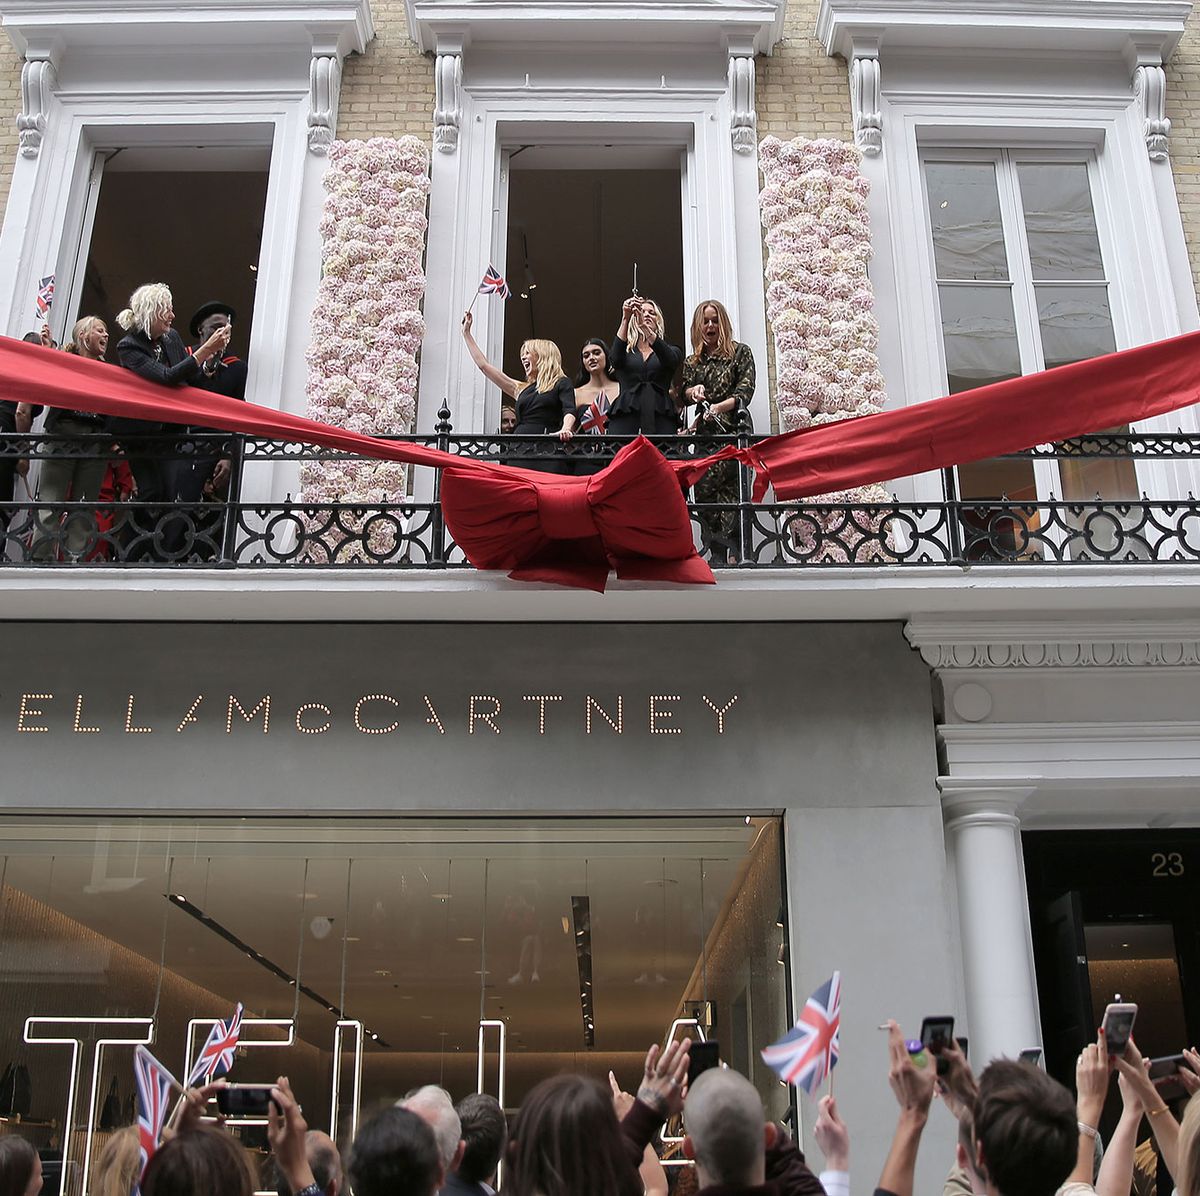 Stella McCartney unveils sustainable shop with 'cleanest air' in London, The Independent